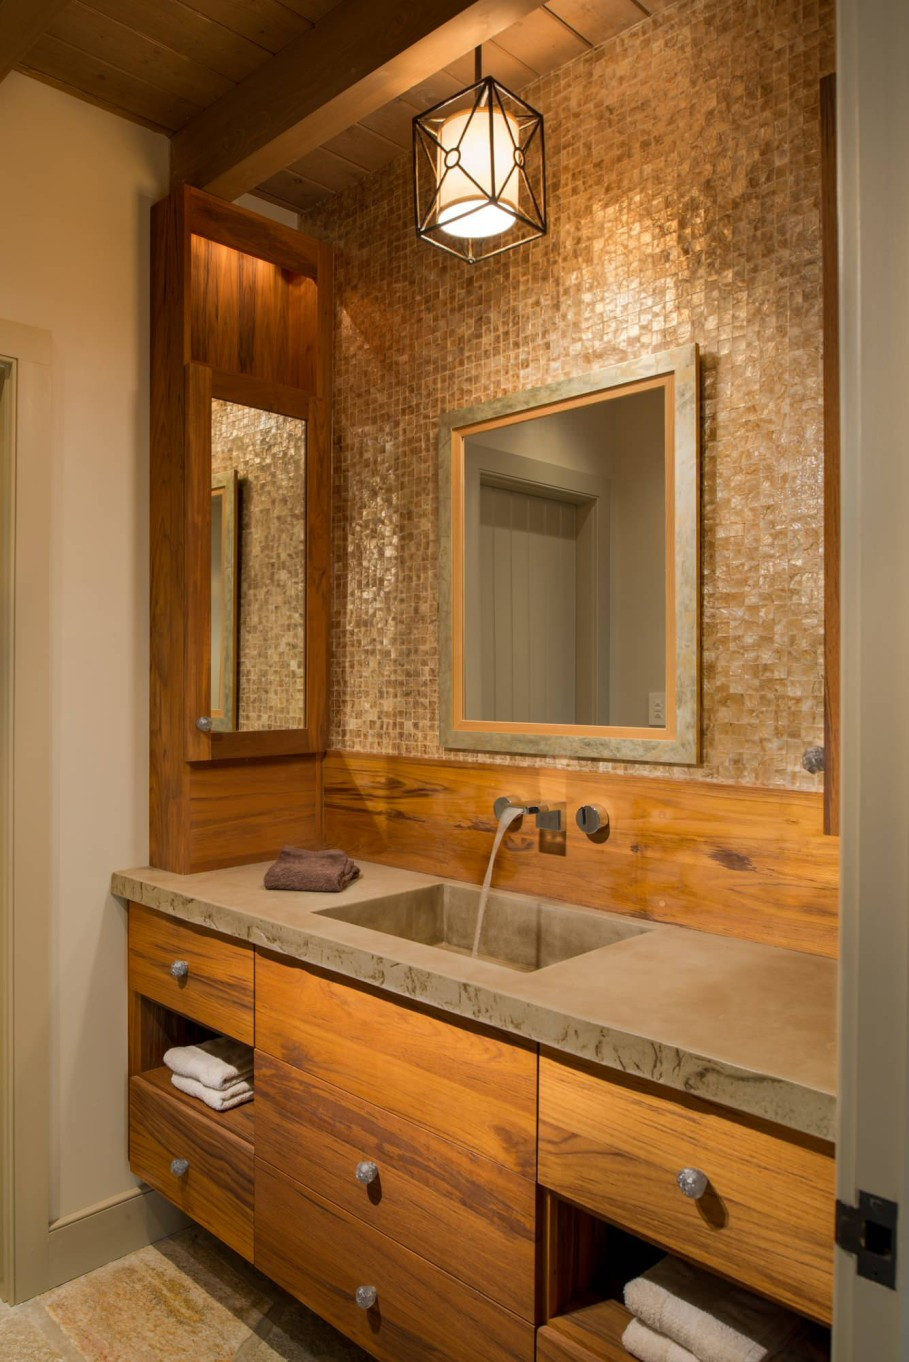 Pendant Lights For Bathroom
 Bathroom Pendant Lighting and How to Incorporate It into